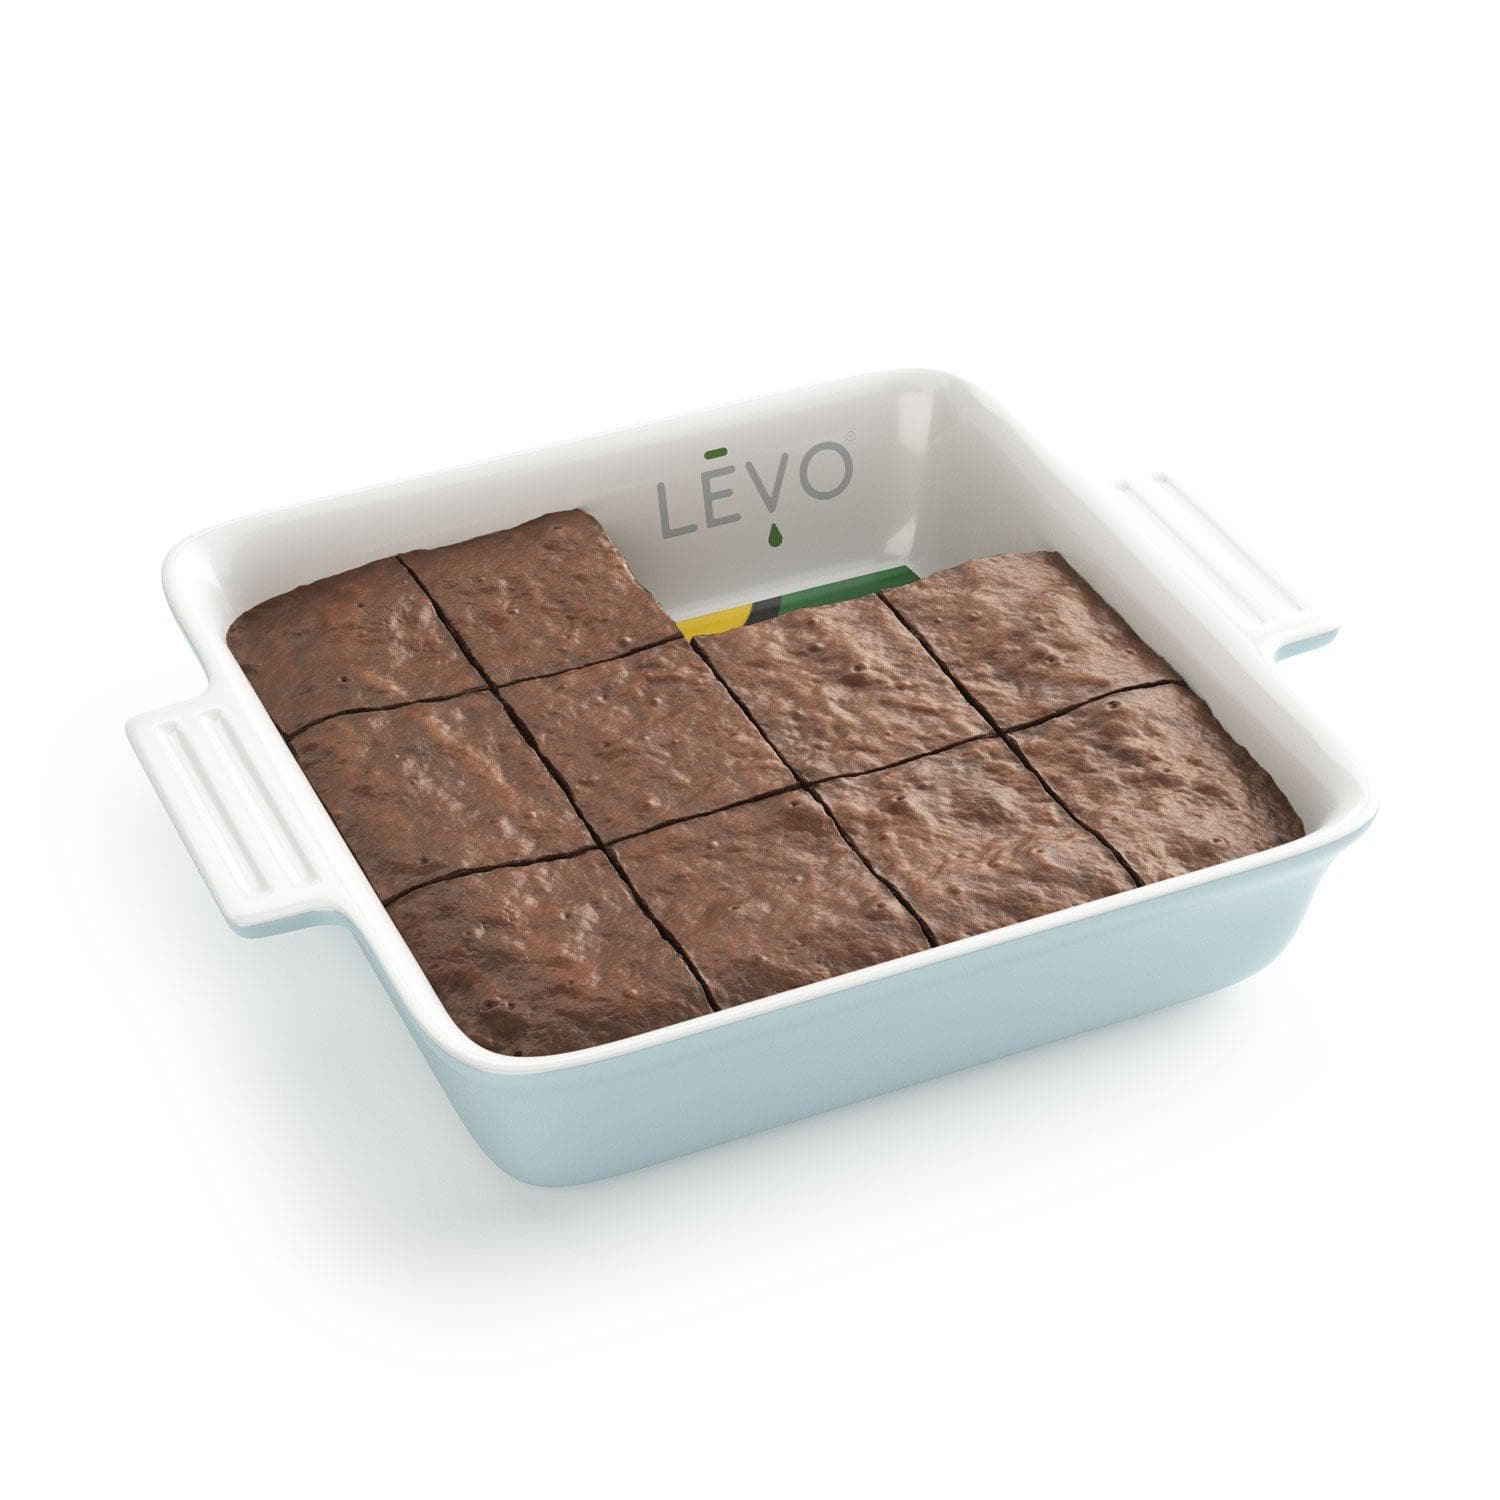 Porcelain Baking Dish by LEVO, perfect for baking one box of LEVO organic brownie mix.